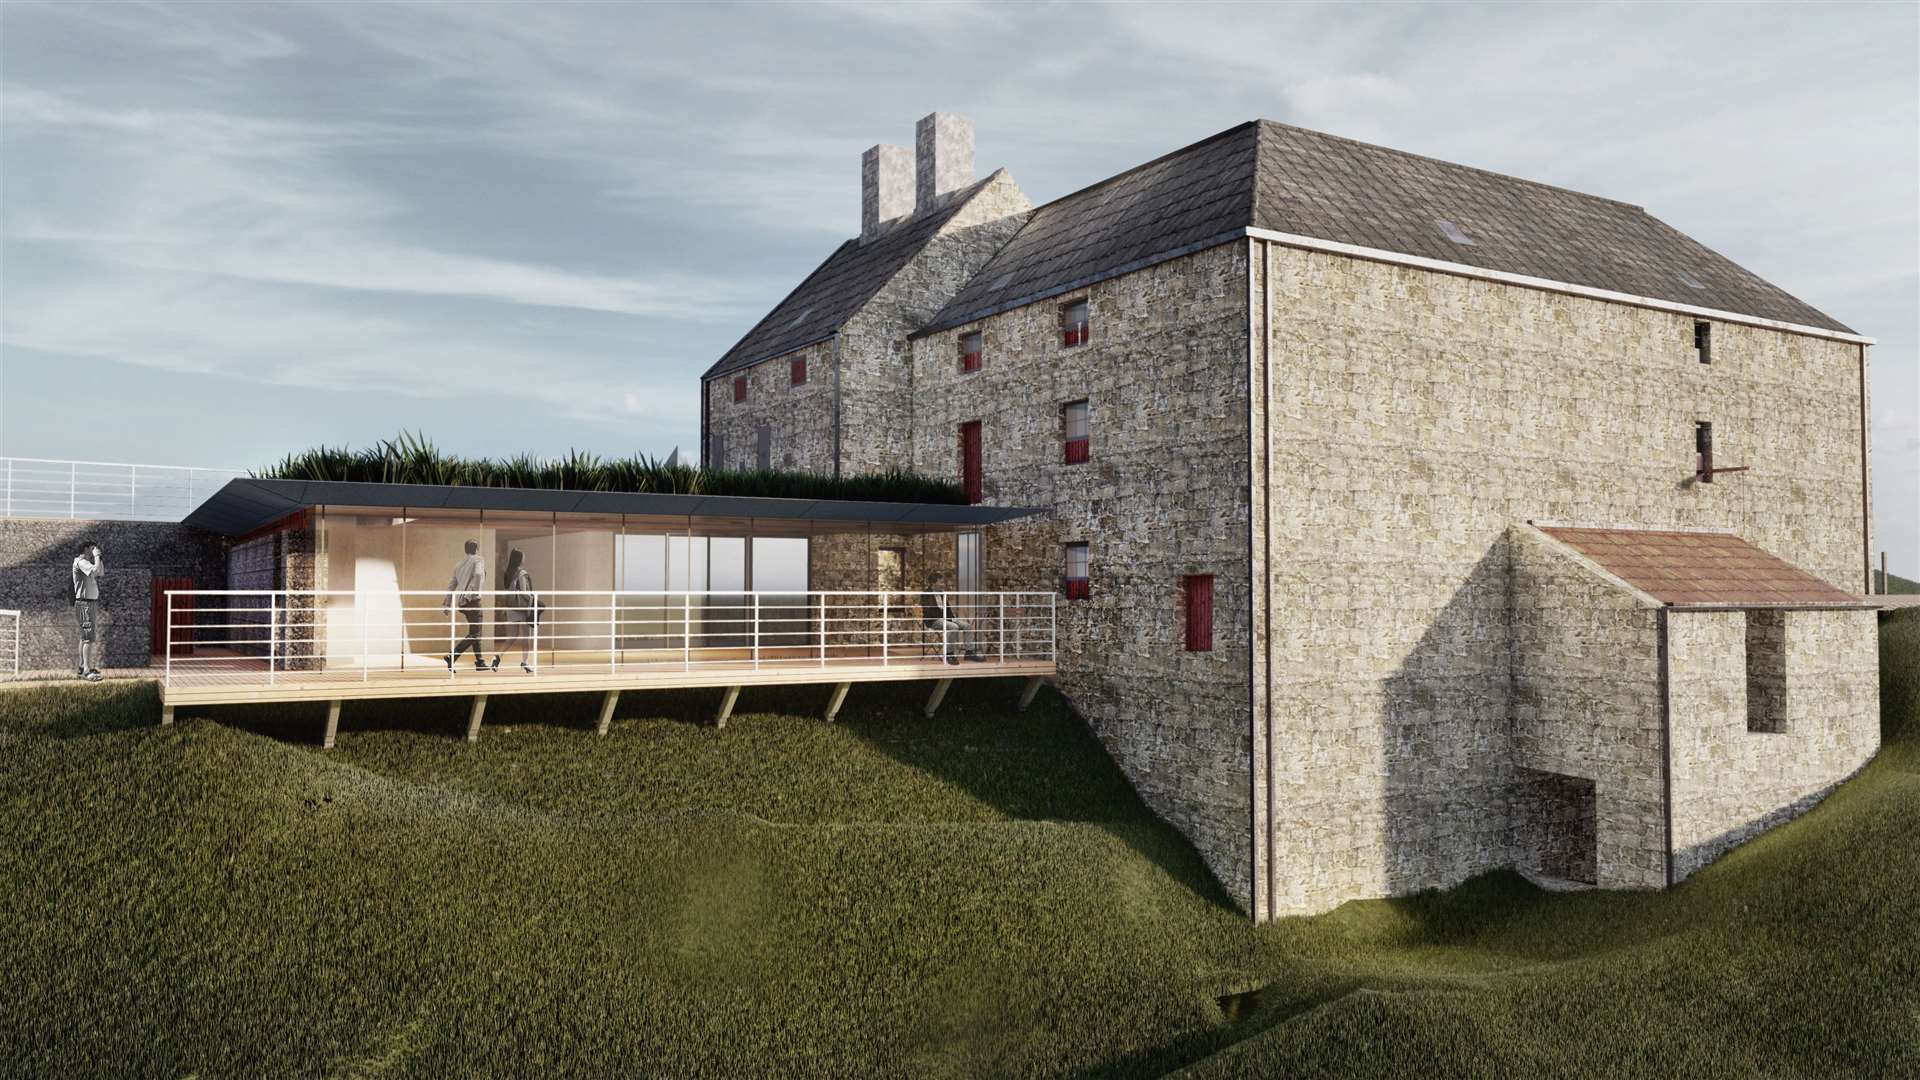 John O’Groats Mill Trust is seeking to create a social, educational and cultural centre. Image: Enes Pilavci for McGregor Bowes